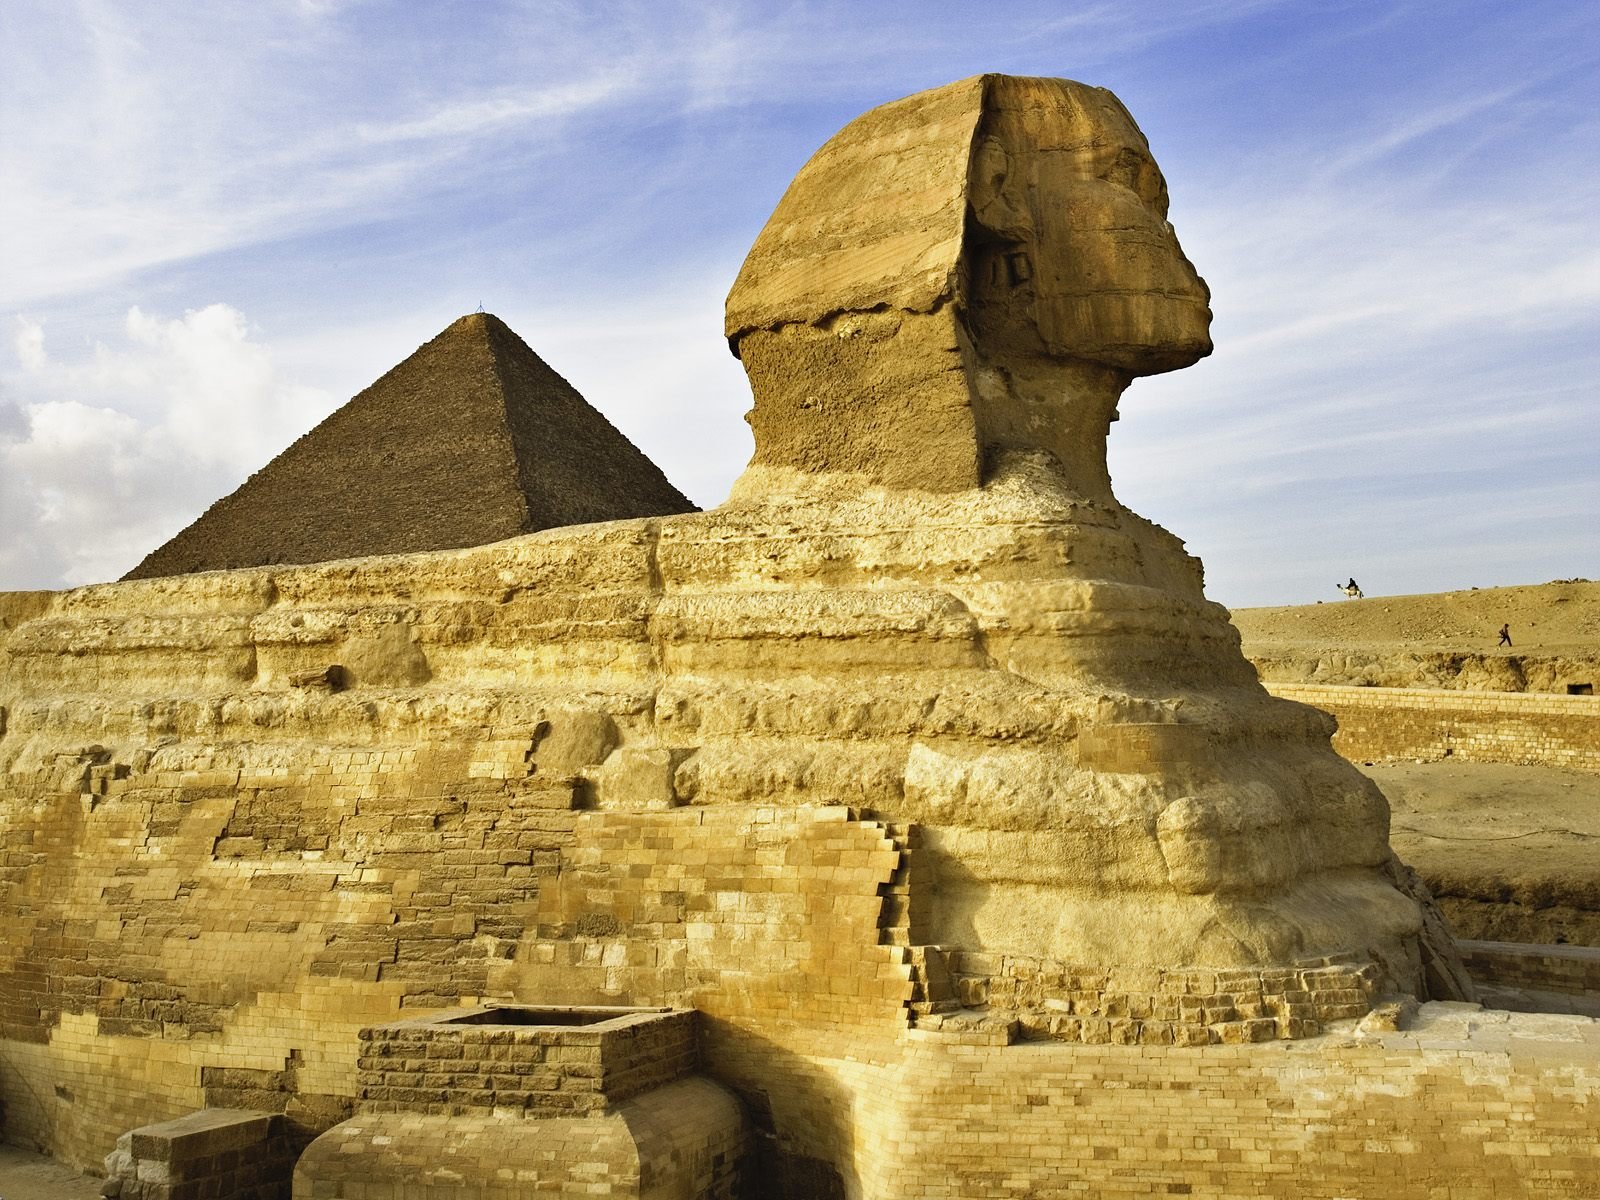 The tail of the Sphinx